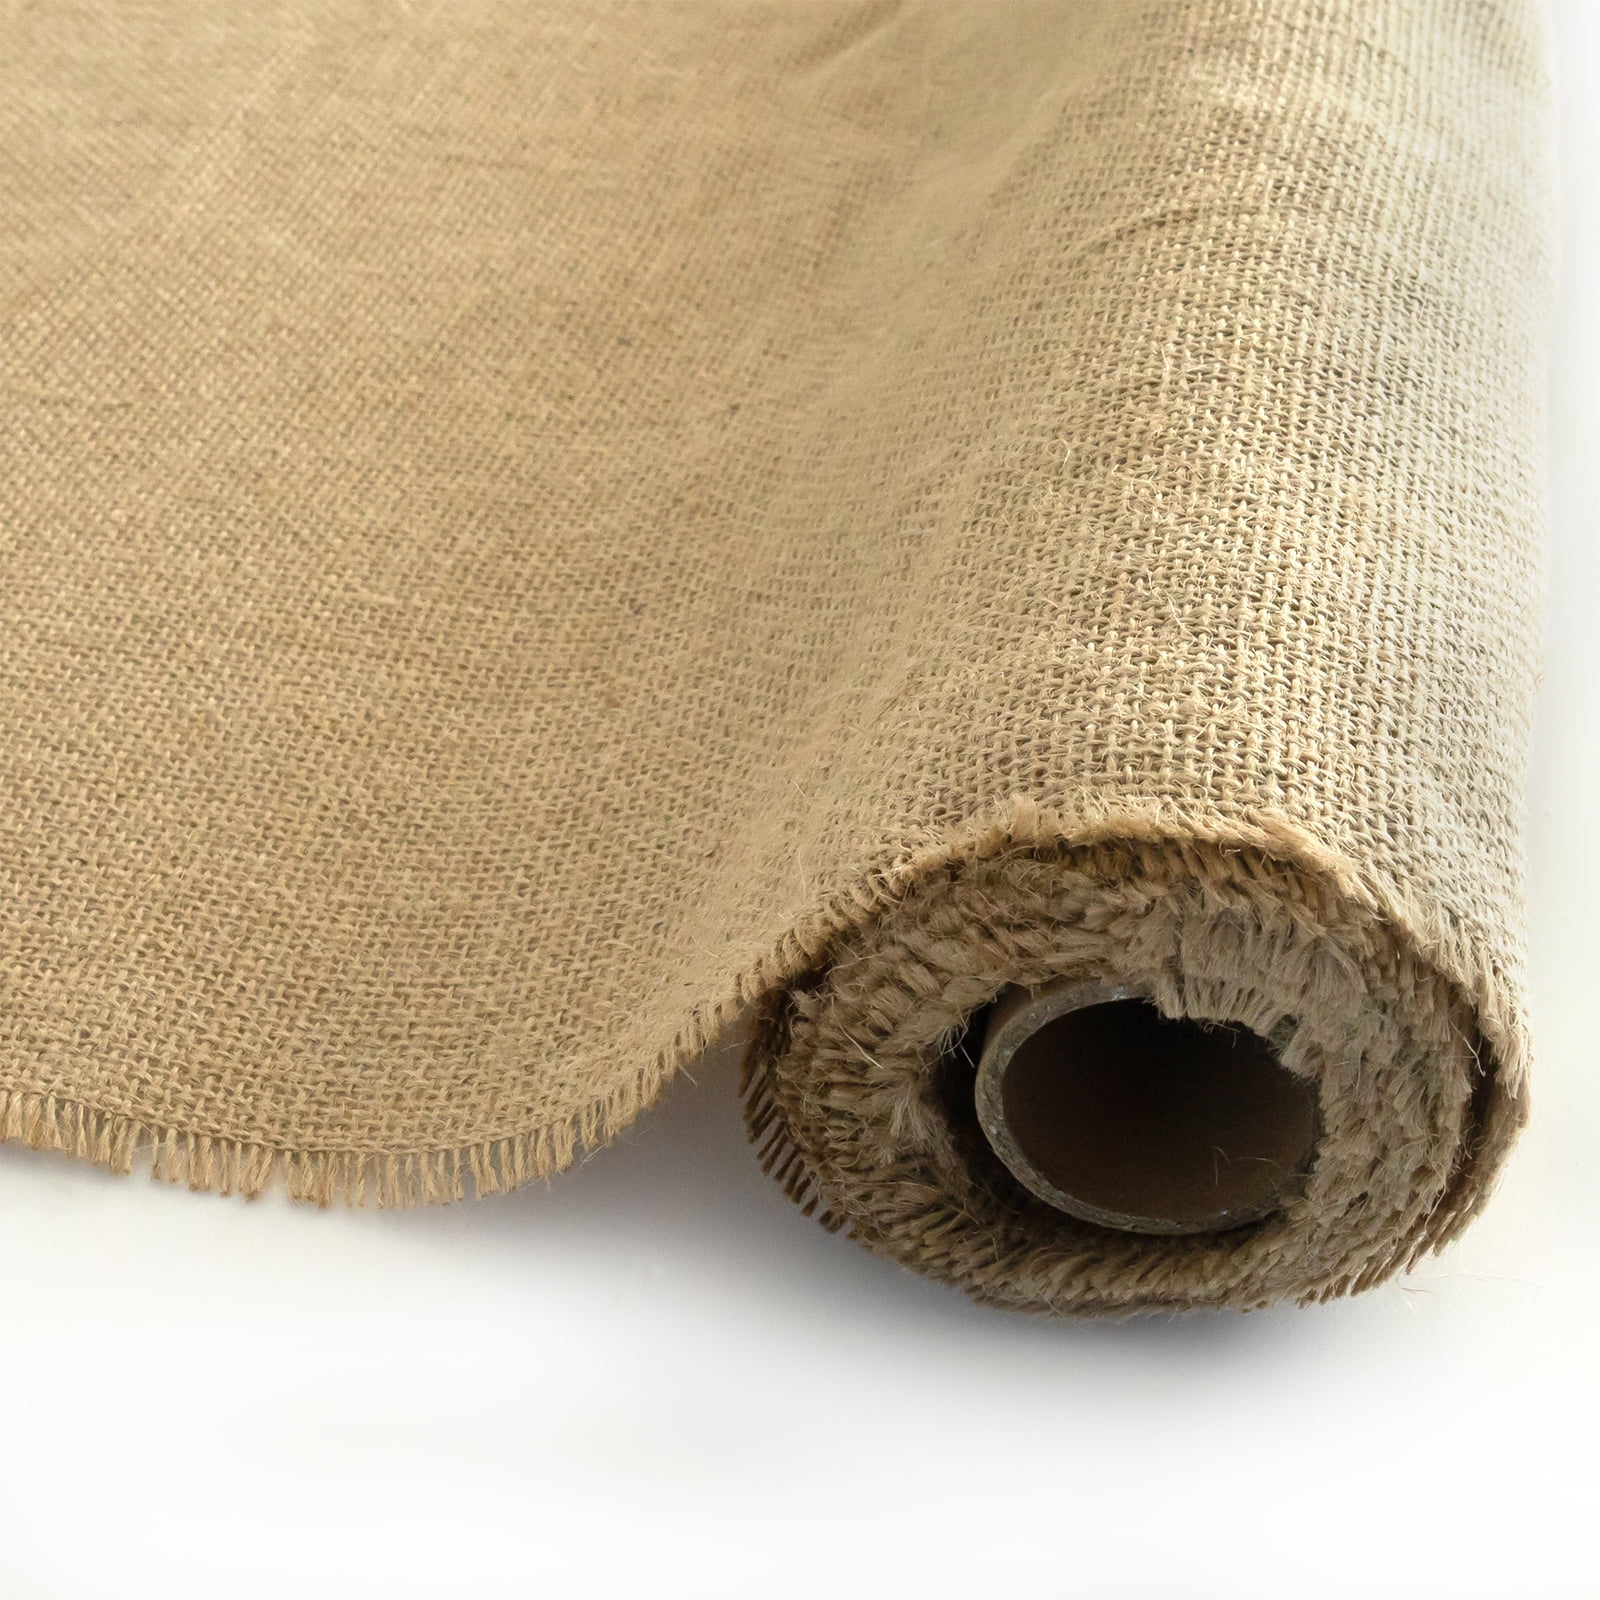 Wellco 63 in. x 15 ft. Gardening Burlap Roll - Natural Burlap Fabric for  Weed Barrier, Tree Wrap Burlap, Rustic Party Decor WEBLN2106315 - The Home  Depot